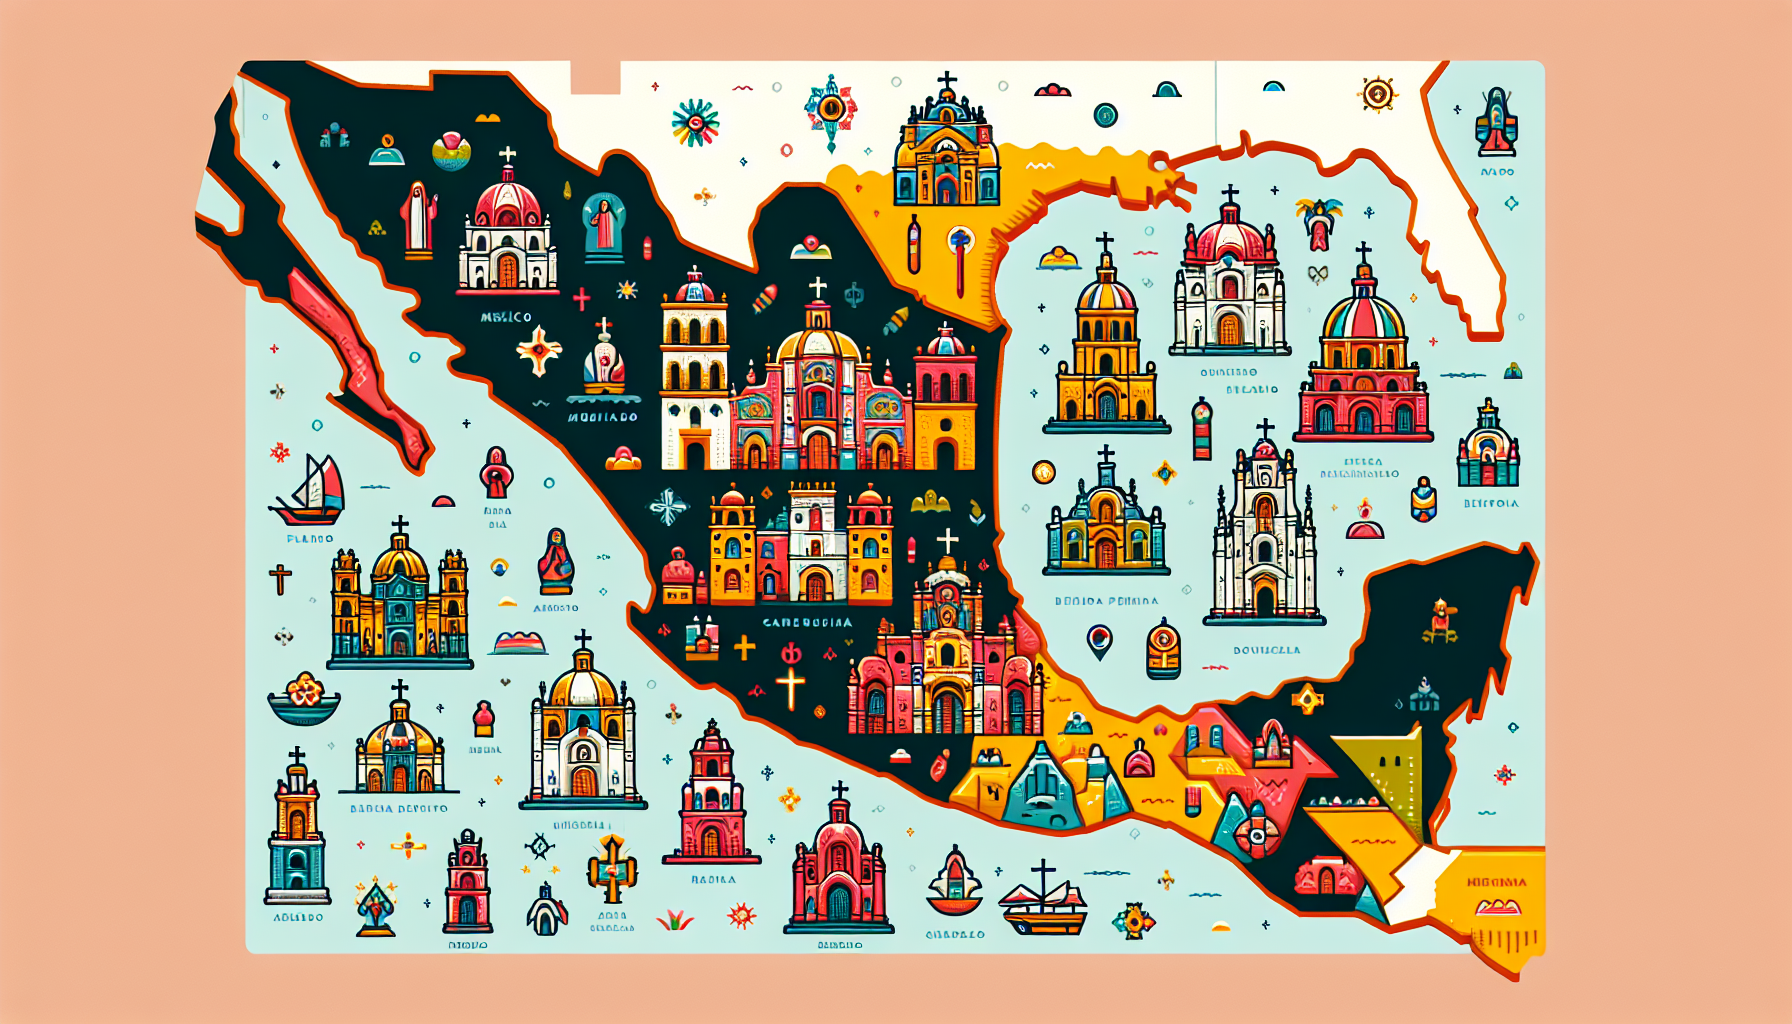 Create an image of a map of Mexico highlighting the locations of various basilicas across the country. Each basilica should be represented by a different icon or color to differentiate them, providing